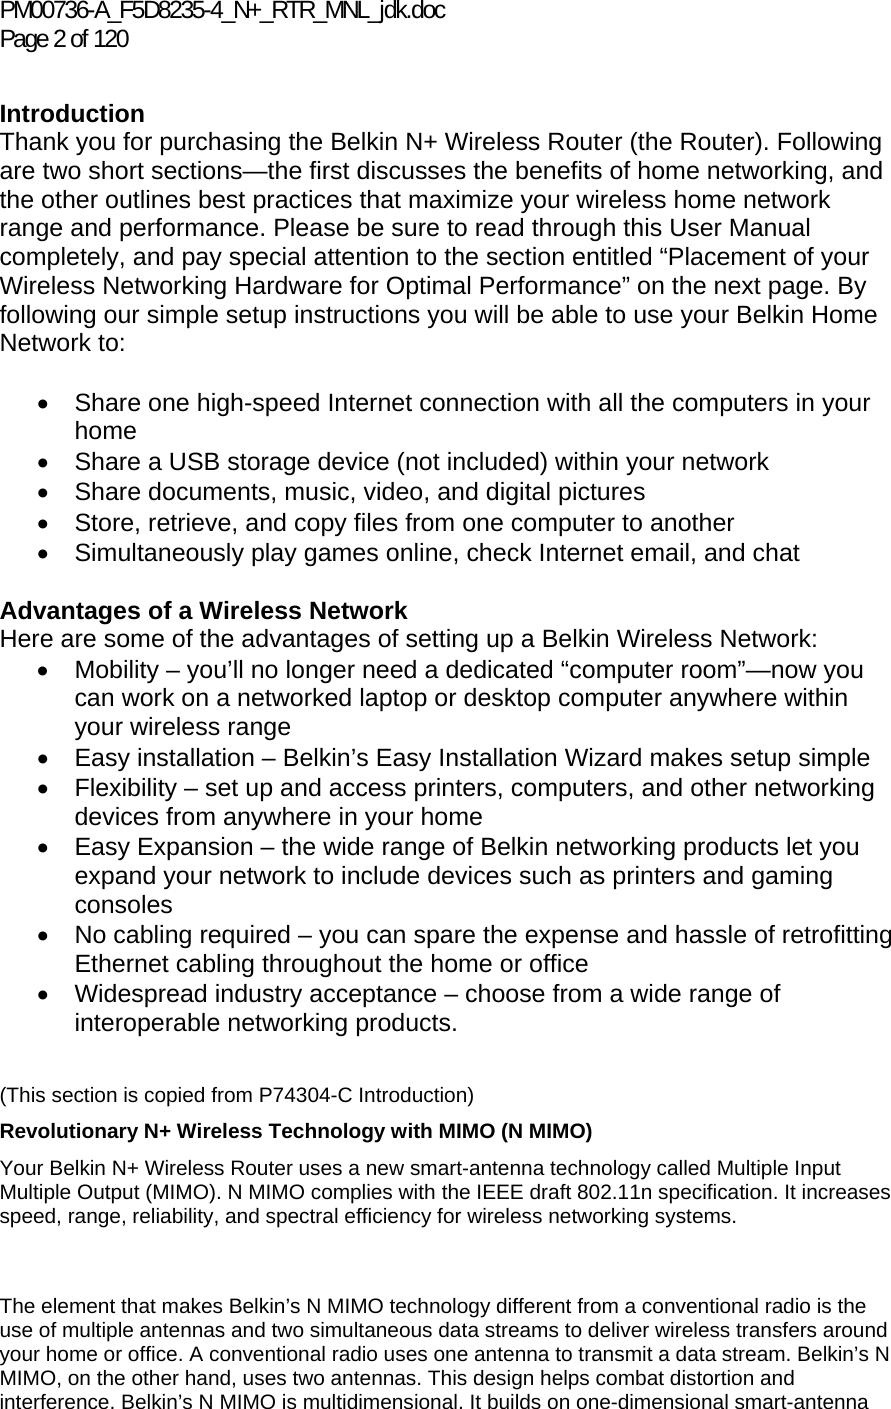 PM00736-A_F5D8235-4_N+_RTR_MNL_jdk.doc Page 2 of 120  Introduction Thank you for purchasing the Belkin N+ Wireless Router (the Router). Following are two short sections—the first discusses the benefits of home networking, and the other outlines best practices that maximize your wireless home network range and performance. Please be sure to read through this User Manual completely, and pay special attention to the section entitled “Placement of your Wireless Networking Hardware for Optimal Performance” on the next page. By following our simple setup instructions you will be able to use your Belkin Home Network to:   •  Share one high-speed Internet connection with all the computers in your home •  Share a USB storage device (not included) within your network • Share documents, music, video, and digital pictures •  Store, retrieve, and copy files from one computer to another •  Simultaneously play games online, check Internet email, and chat   Advantages of a Wireless Network Here are some of the advantages of setting up a Belkin Wireless Network: •  Mobility – you’ll no longer need a dedicated “computer room”—now you can work on a networked laptop or desktop computer anywhere within your wireless range •  Easy installation – Belkin’s Easy Installation Wizard makes setup simple •  Flexibility – set up and access printers, computers, and other networking devices from anywhere in your home •  Easy Expansion – the wide range of Belkin networking products let you expand your network to include devices such as printers and gaming consoles •  No cabling required – you can spare the expense and hassle of retrofitting Ethernet cabling throughout the home or office •  Widespread industry acceptance – choose from a wide range of interoperable networking products.   The element that makes Belkin’s N MIMO technology different from a conventional radio is the use of multiple antennas and two simultaneous data streams to deliver wireless transfers around your home or office. A conventional radio uses one antenna to transmit a data stream. Belkin’s N MIMO, on the other hand, uses two antennas. This design helps combat distortion and interference. Belkin’s N MIMO is multidimensional. It builds on one-dimensional smart-antenna (This section is copied from P74304-C Introduction) Revolutionary N+ Wireless Technology with MIMO (N MIMO) Your Belkin N+ Wireless Router uses a new smart-antenna technology called Multiple Input Multiple Output (MIMO). N MIMO complies with the IEEE draft 802.11n specification. It increases speed, range, reliability, and spectral efficiency for wireless networking systems.  